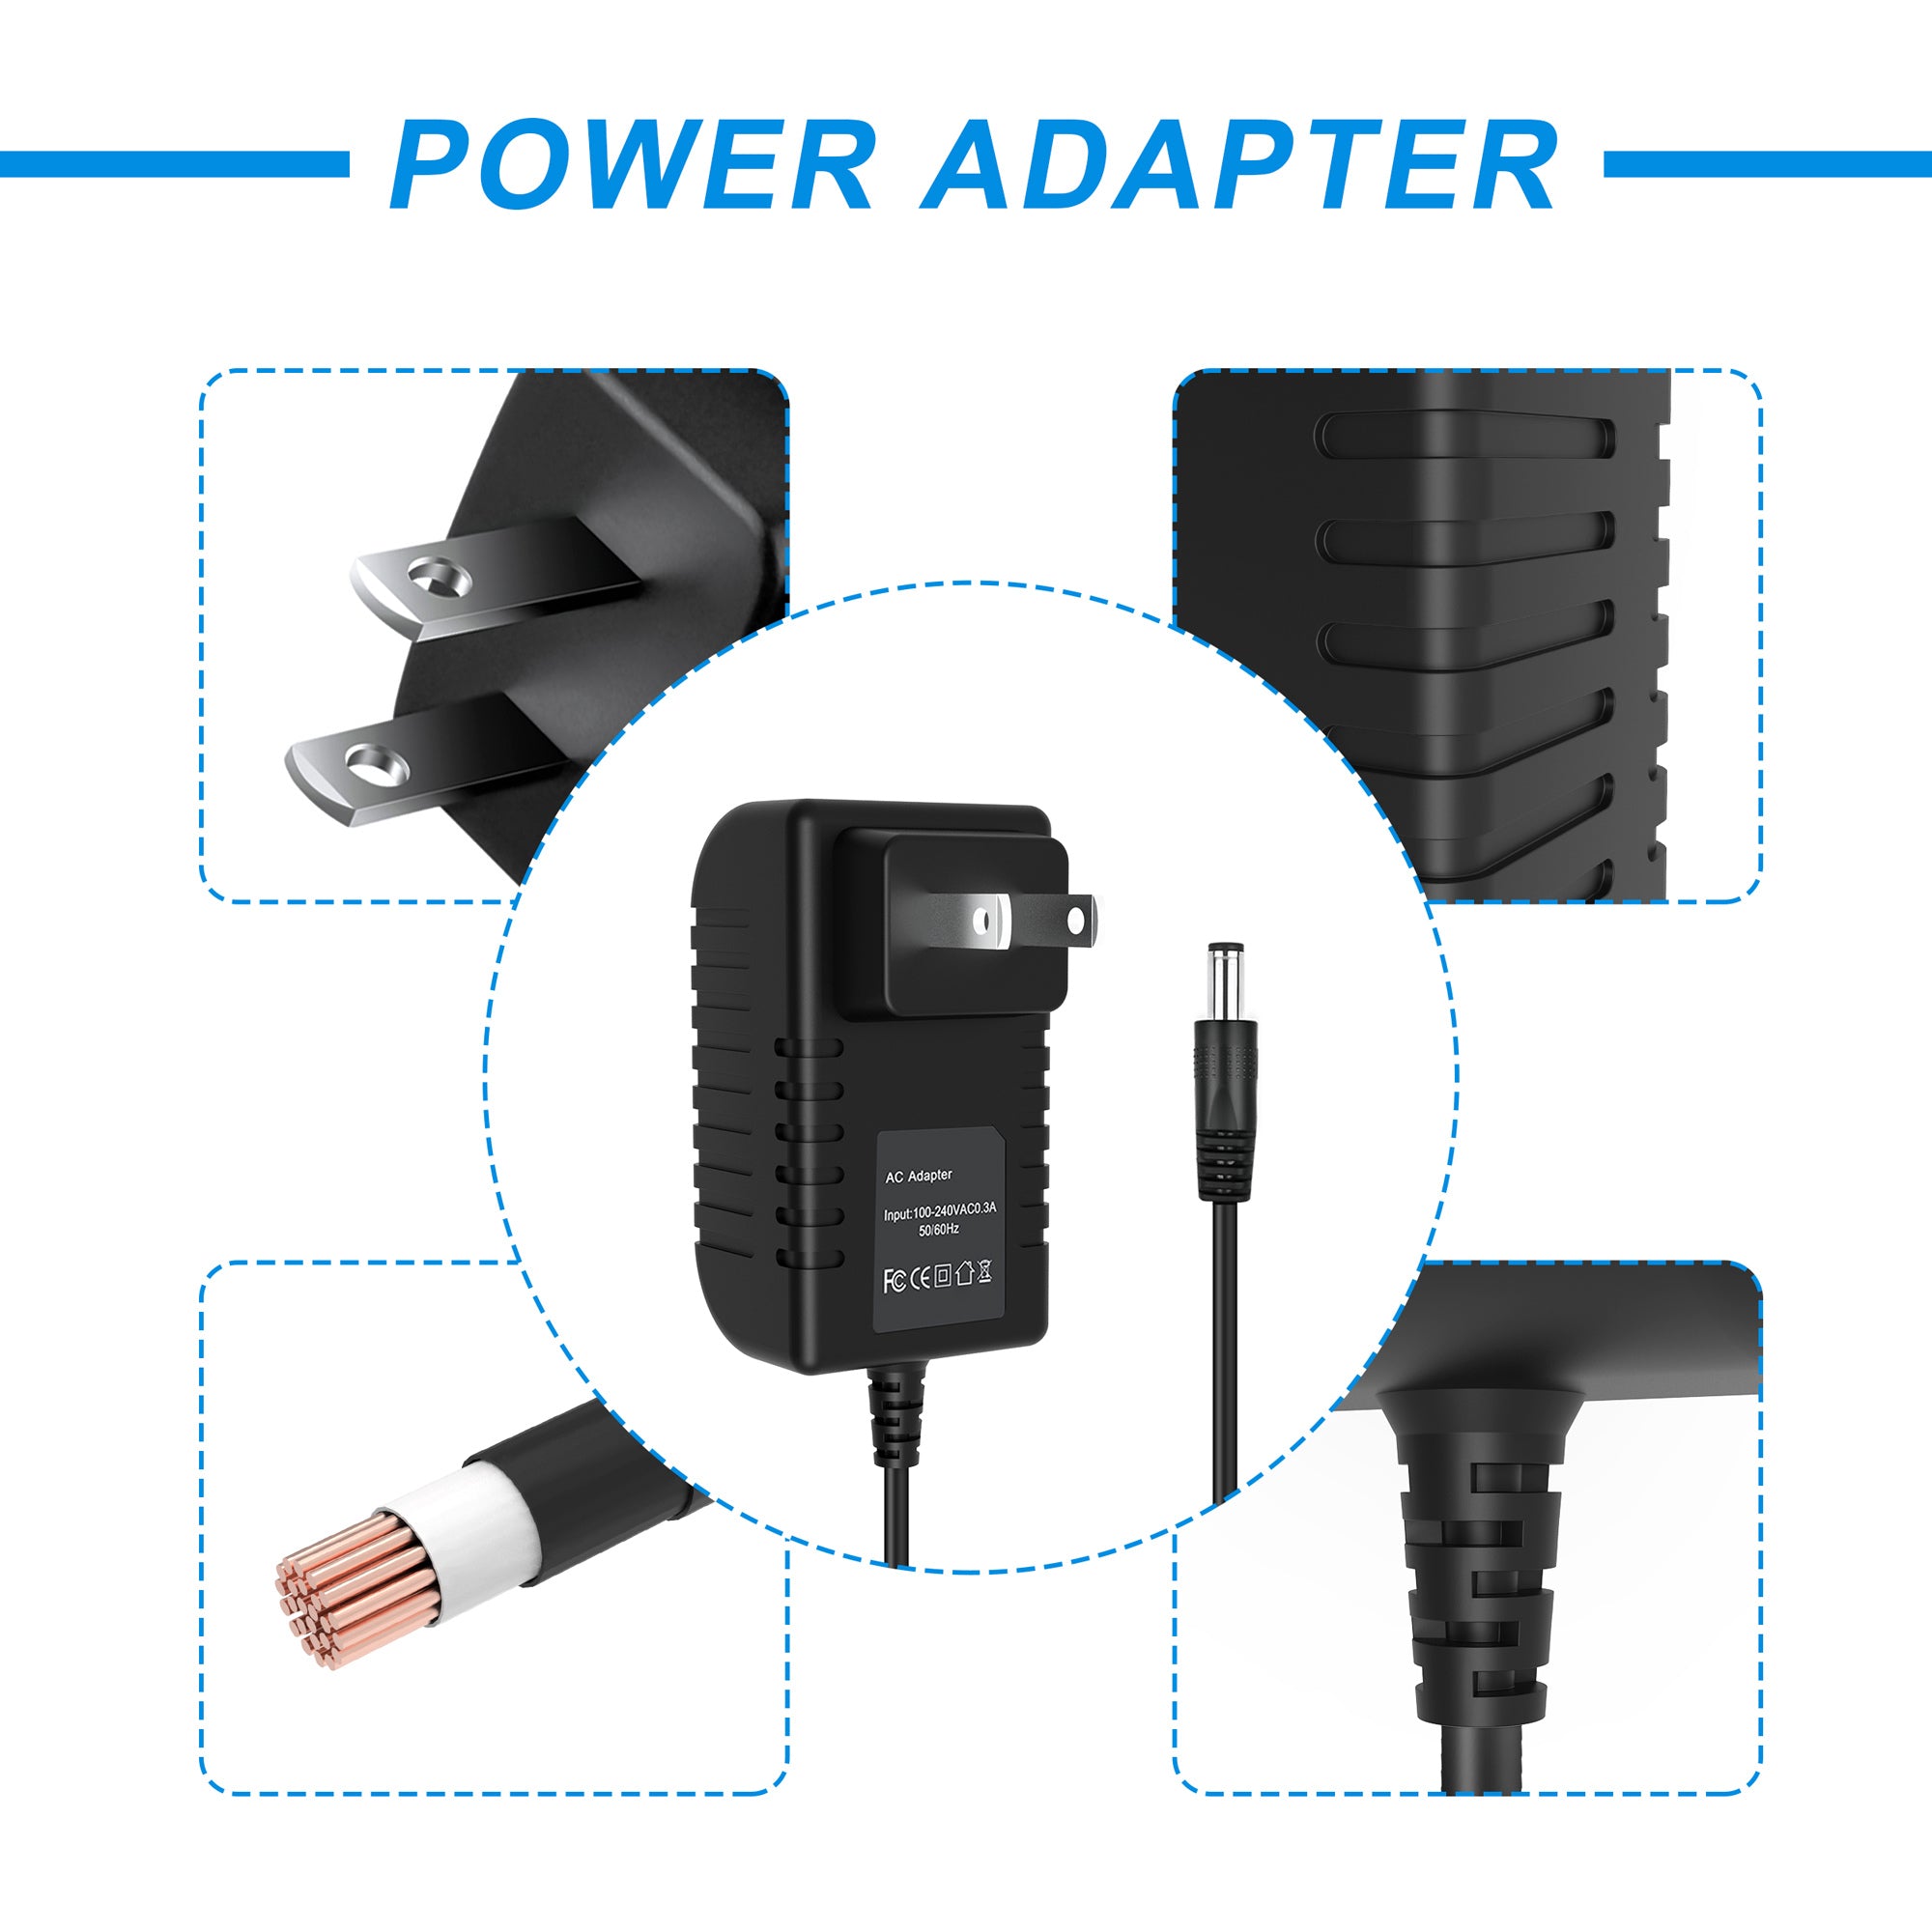 AbleGrid 5V AC/DC Adapter Compatible with ADP WA-10F05C 5VDC Class 2 Transformer Power Supply Cord Cable PS Wall Home Charger Input: 100V - 120V AC - 240 VAC 50/60Hz Worldwide Voltage Use Mains PSU